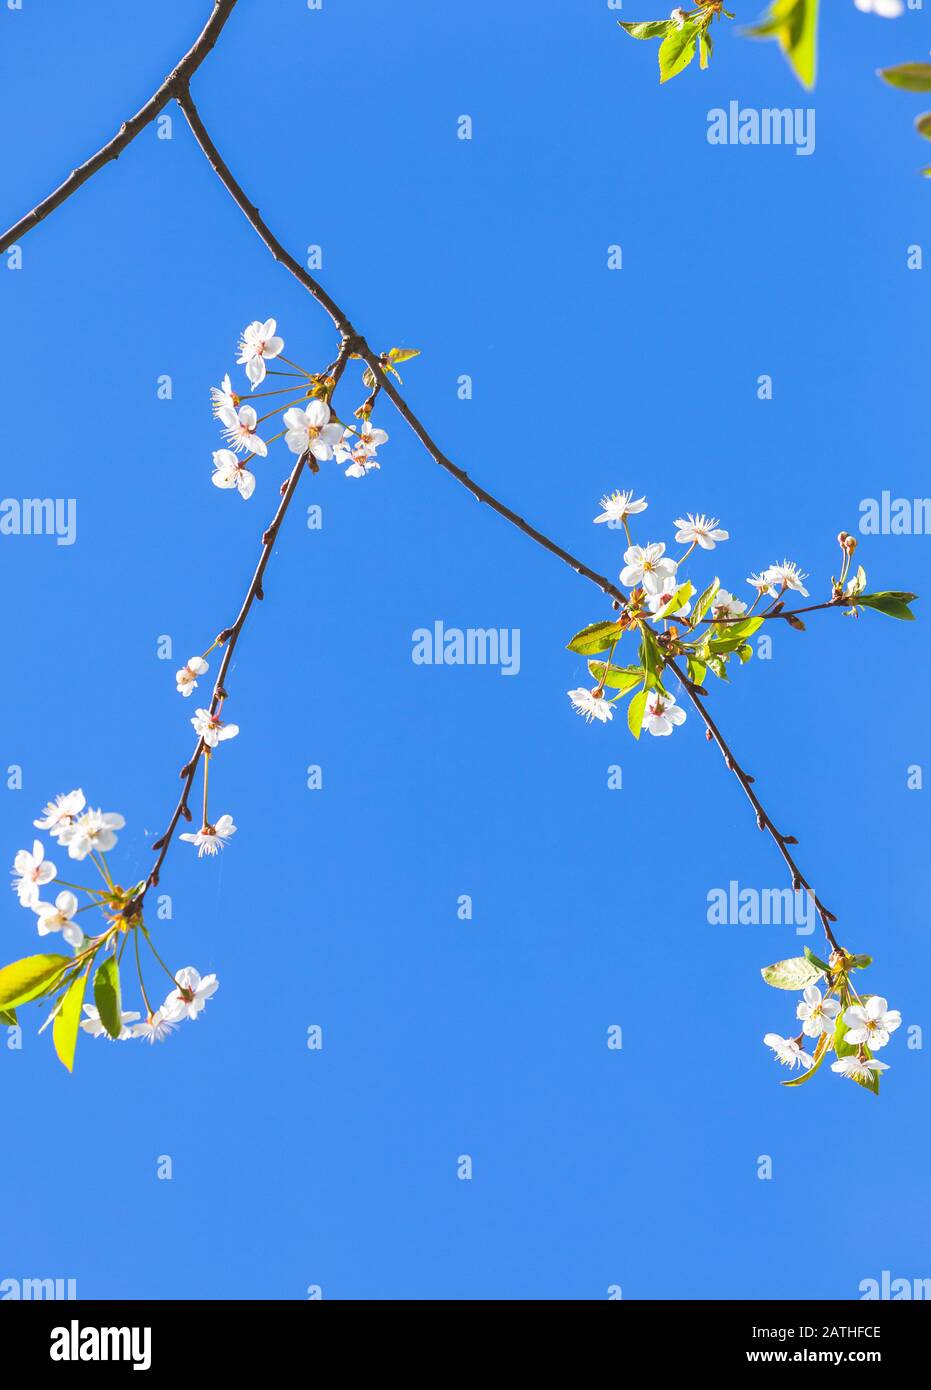 Cherry blossom. White flowers under clear blue sky background close-up photo with selective soft focus Stock Photo